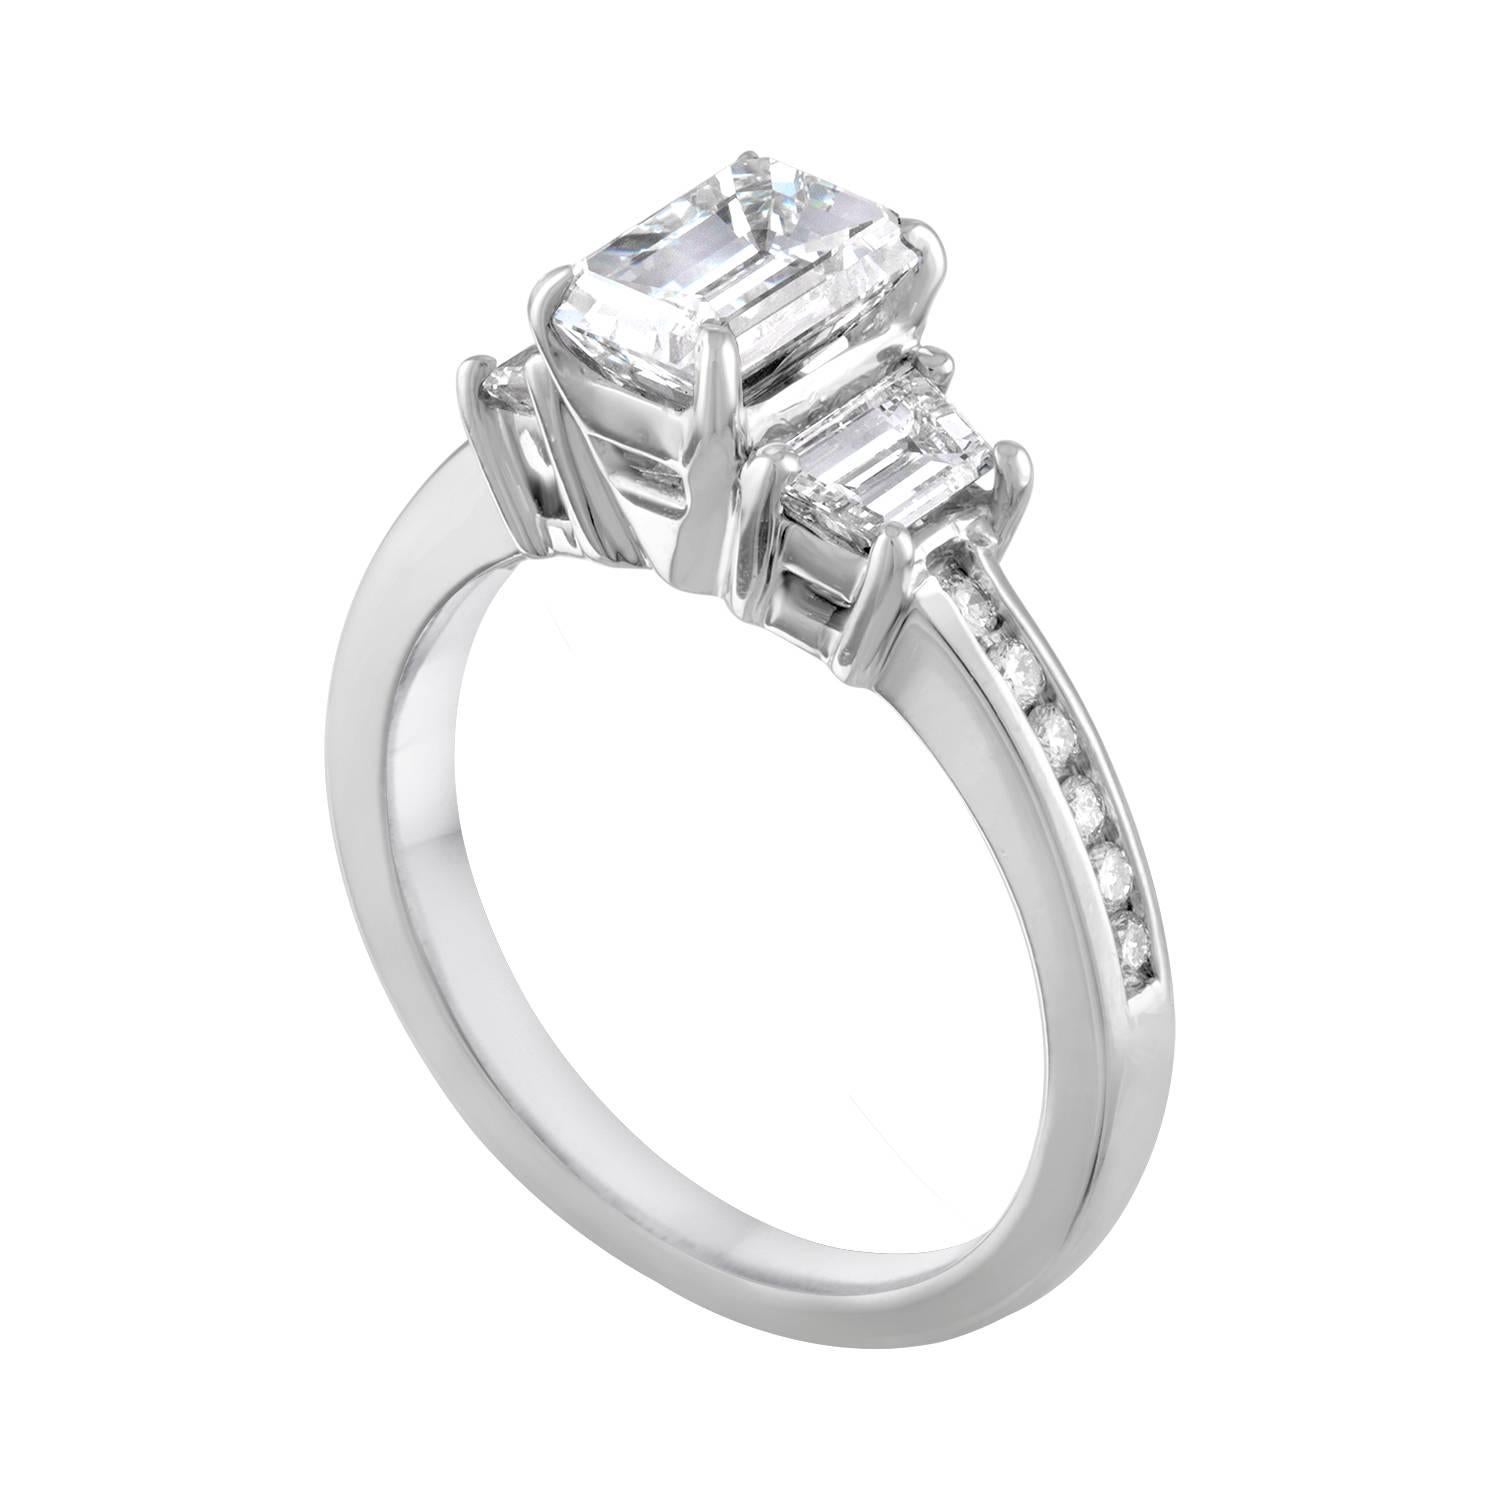 3-Stone Diamond Ring.
The ring is 14K White Gold.
The center stone in an Emerald Cut Diamond.
The center stone is GIA Certified Diamond 1.16 Carats G VVS2.
The 2 side stones are Trapezoids Diamonds 0.50 Carats G VS.
There are 0.20 Carats in Small